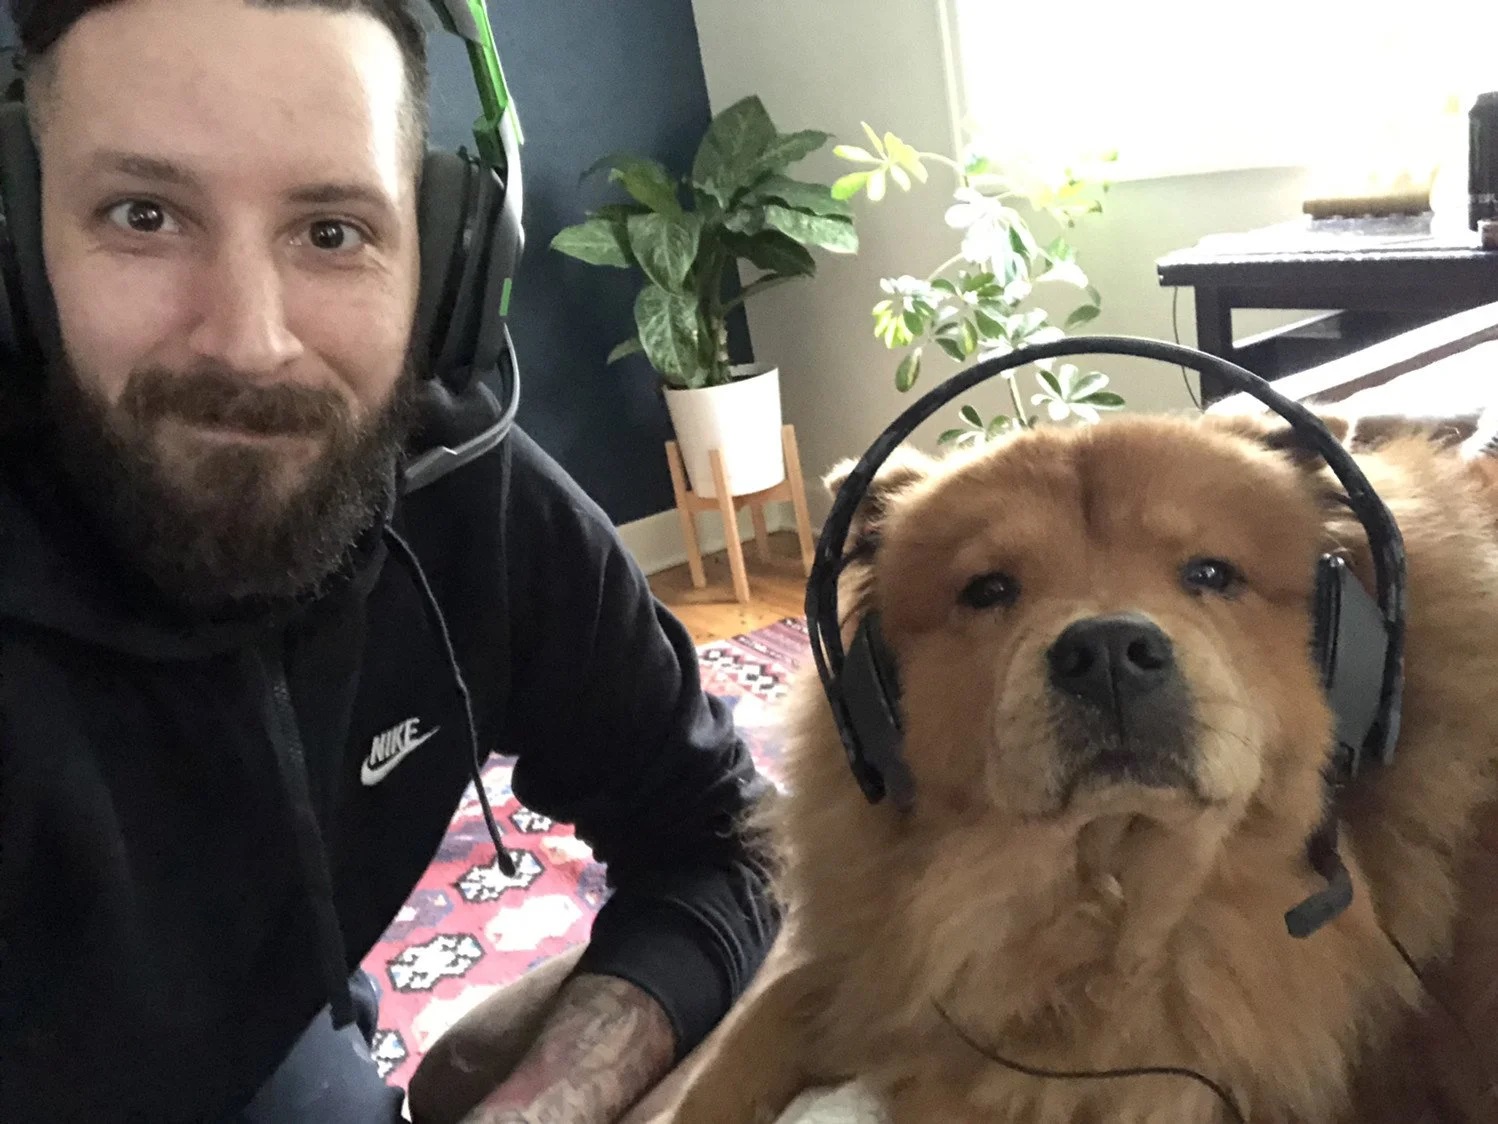 man and dog both wearing headphones, preparing to play video games together